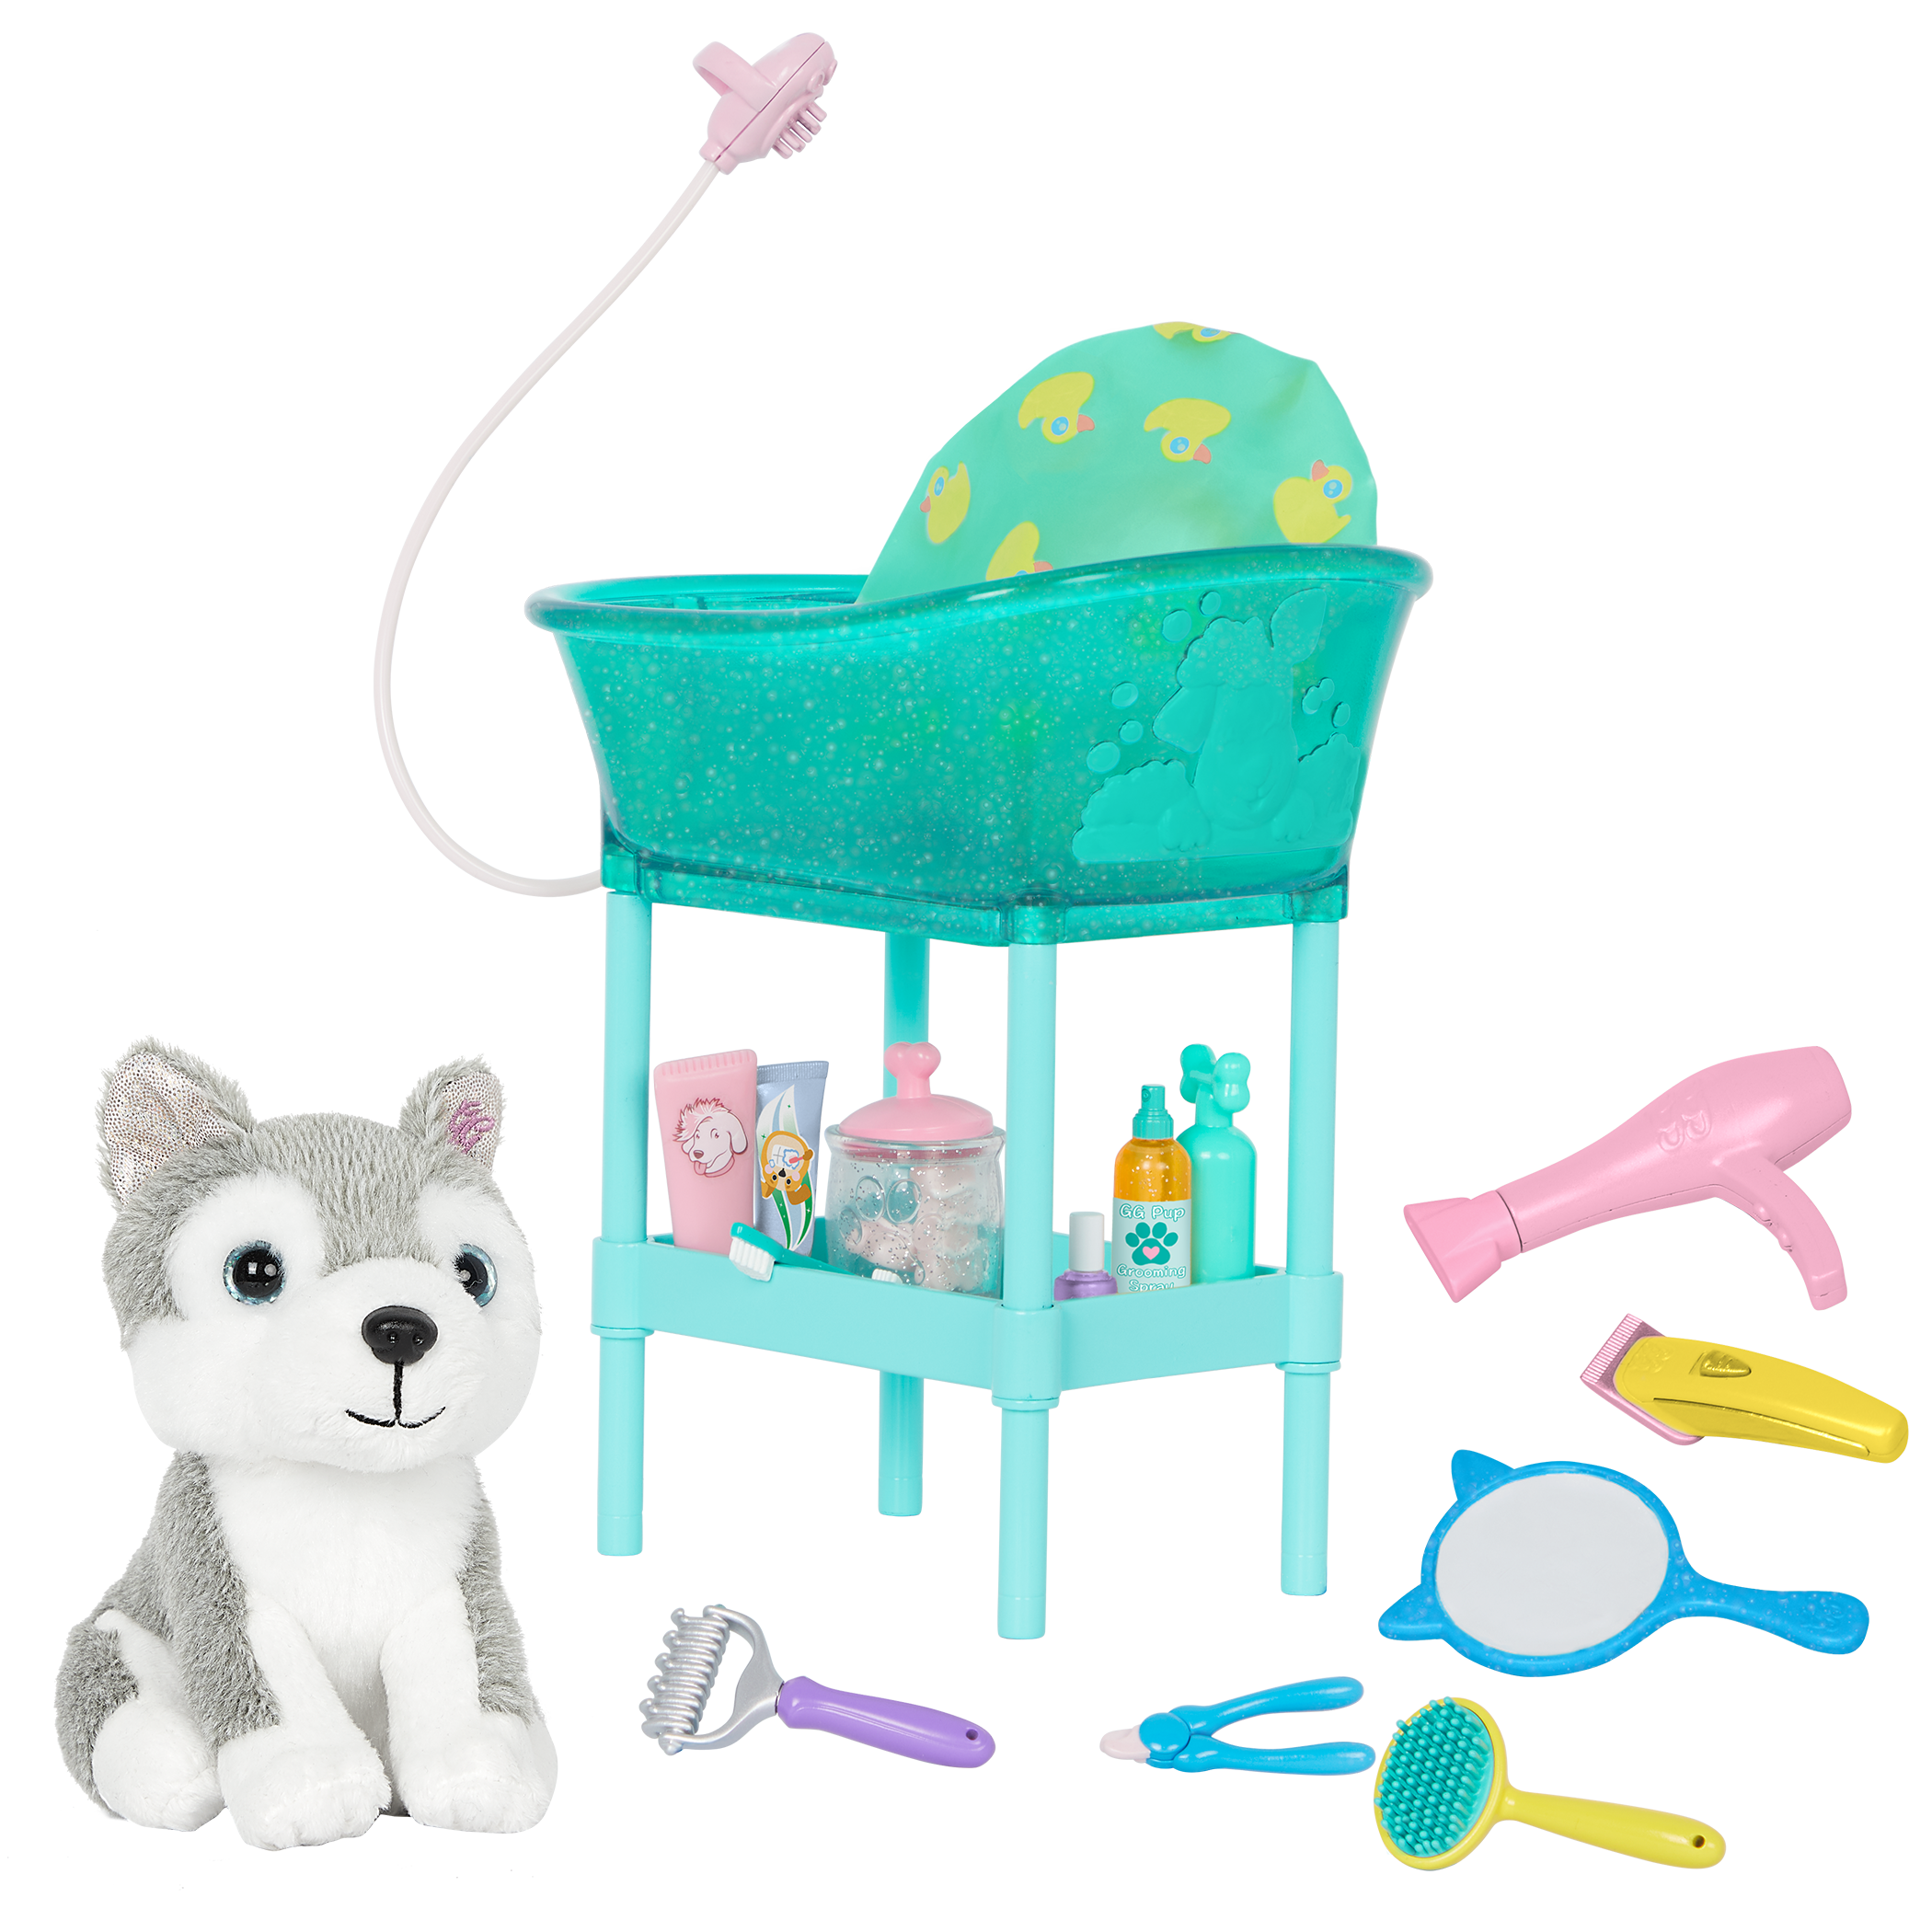 Glitter Girls glitter girls - stuffed puppy playset - dog training toys -  doll pets & accessories - toys for kids 3 years+